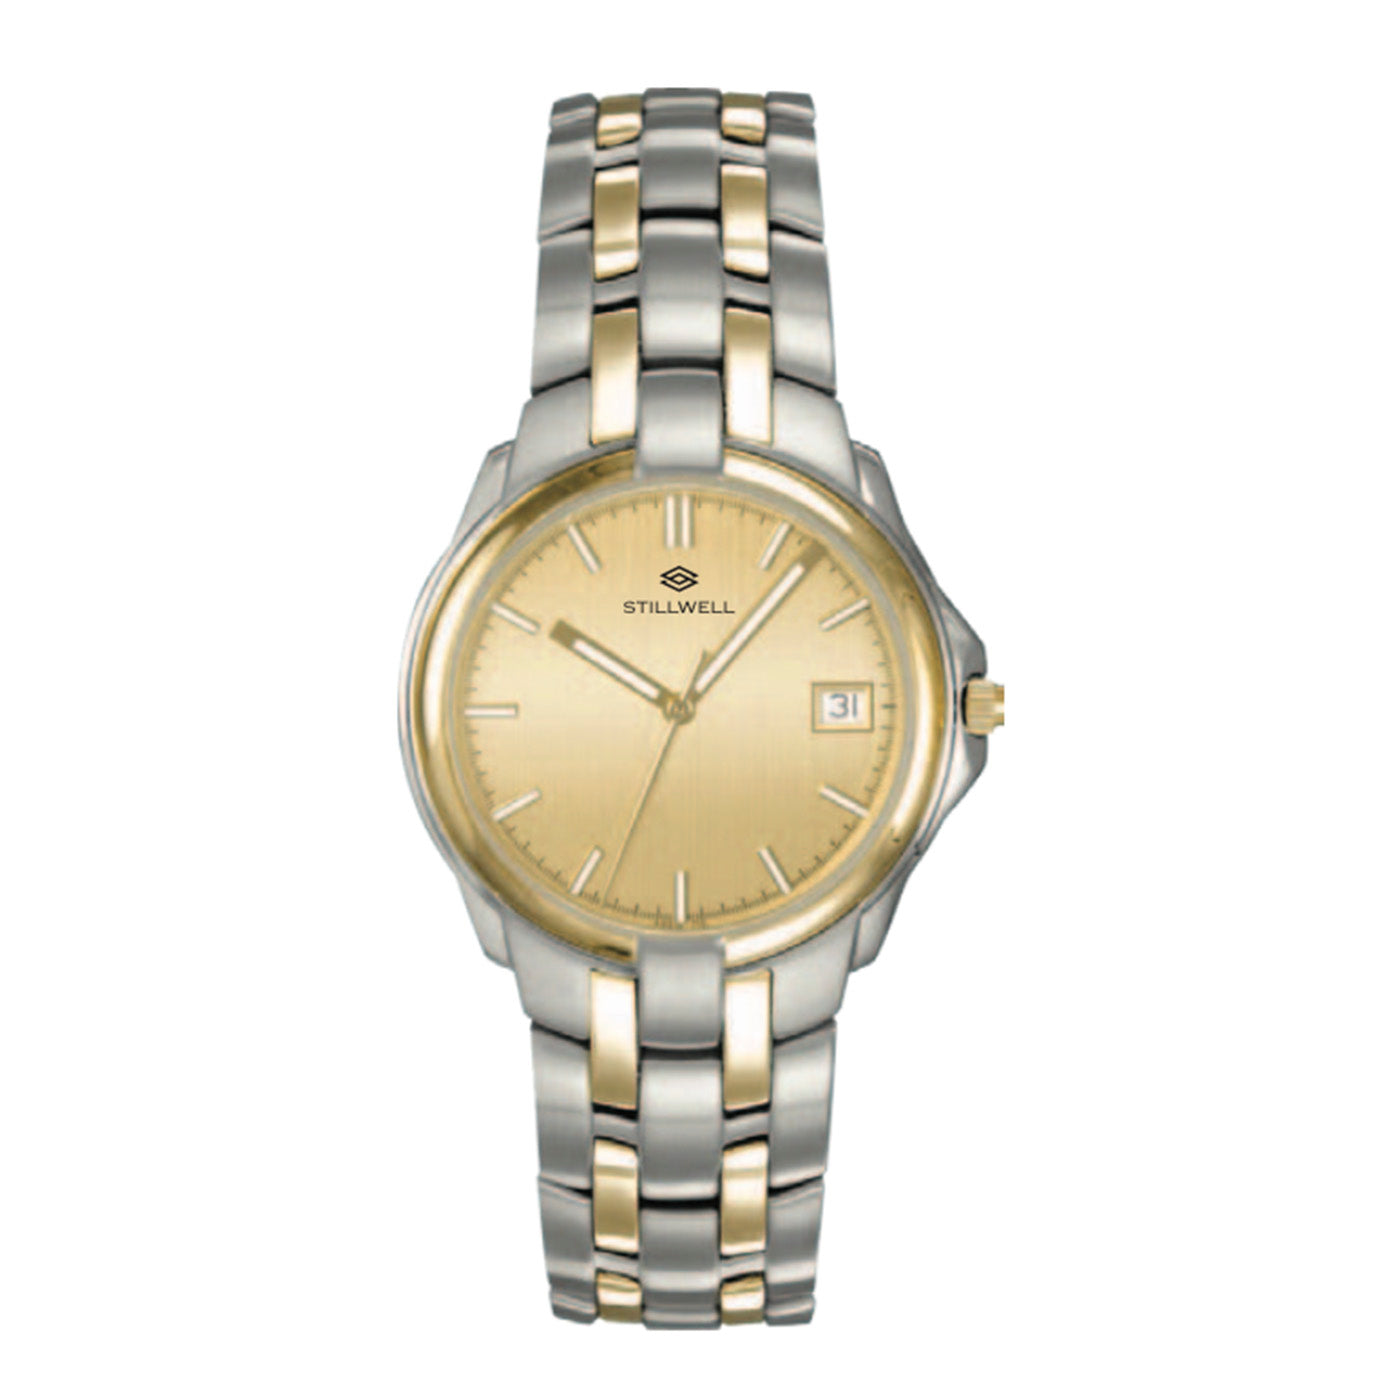 Stillwell Gold and Silver Watch